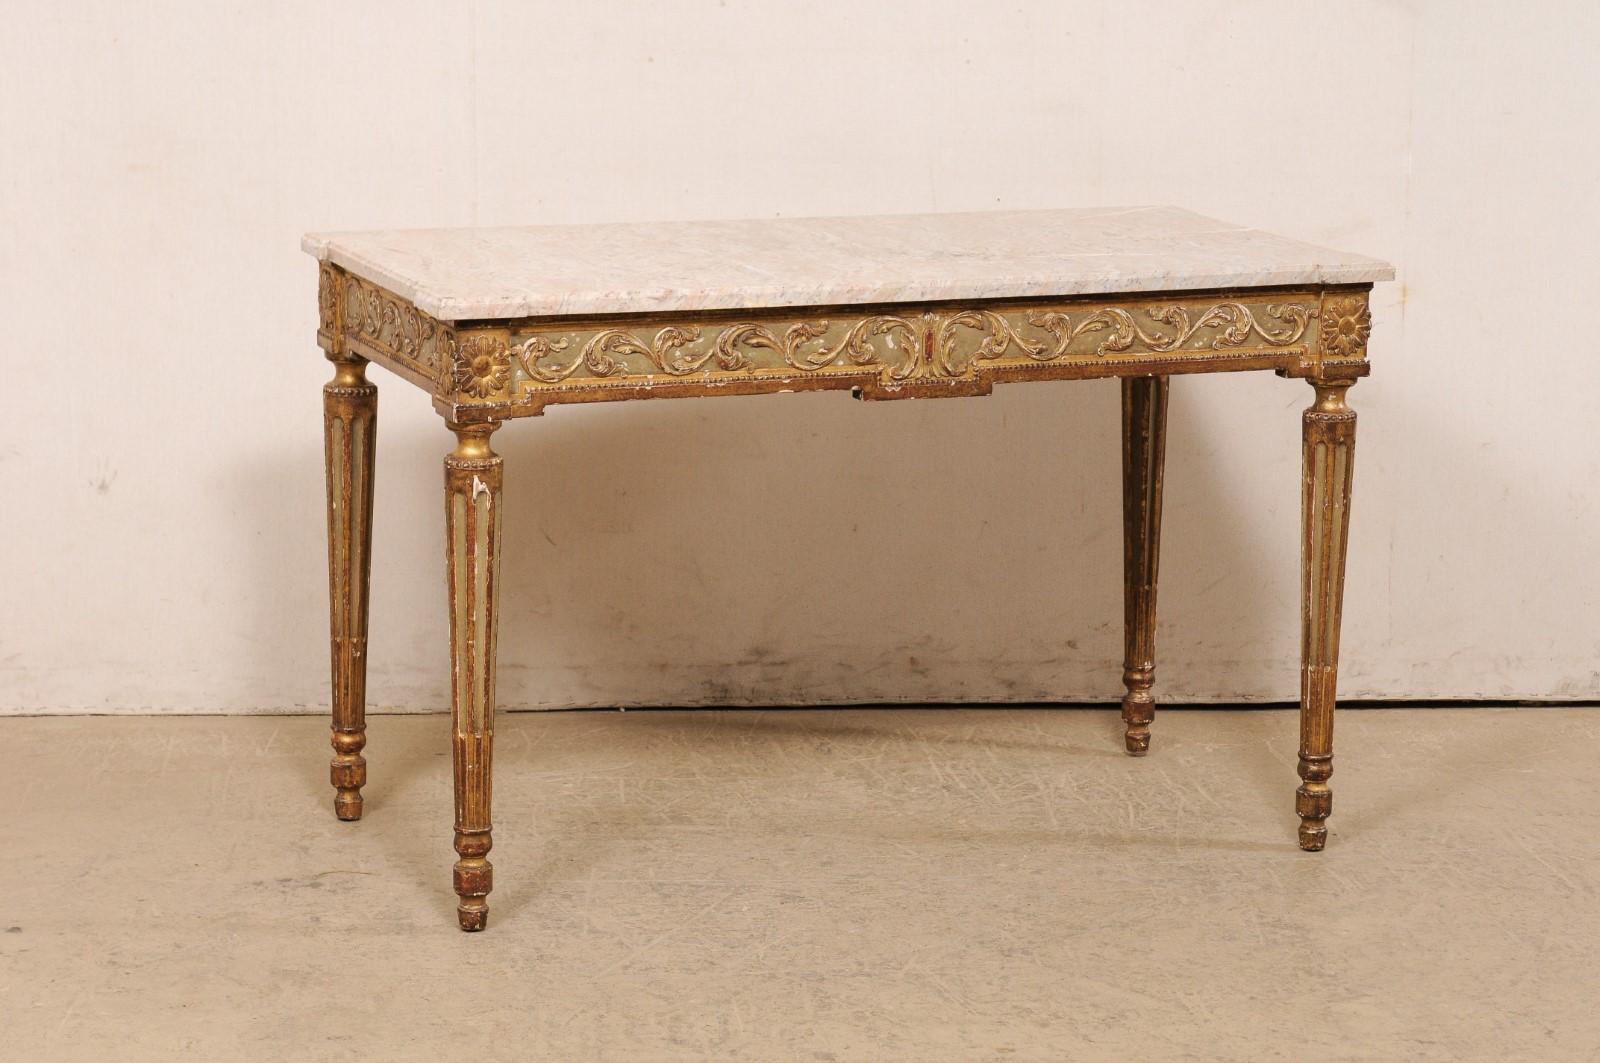 An Italian carved and giltwood console table, with its original marble top, from the turn of the 19th and 20th century. This antique table from Italy has a rectangular-shaped marble top with projected squared corners, atop an apron carved with